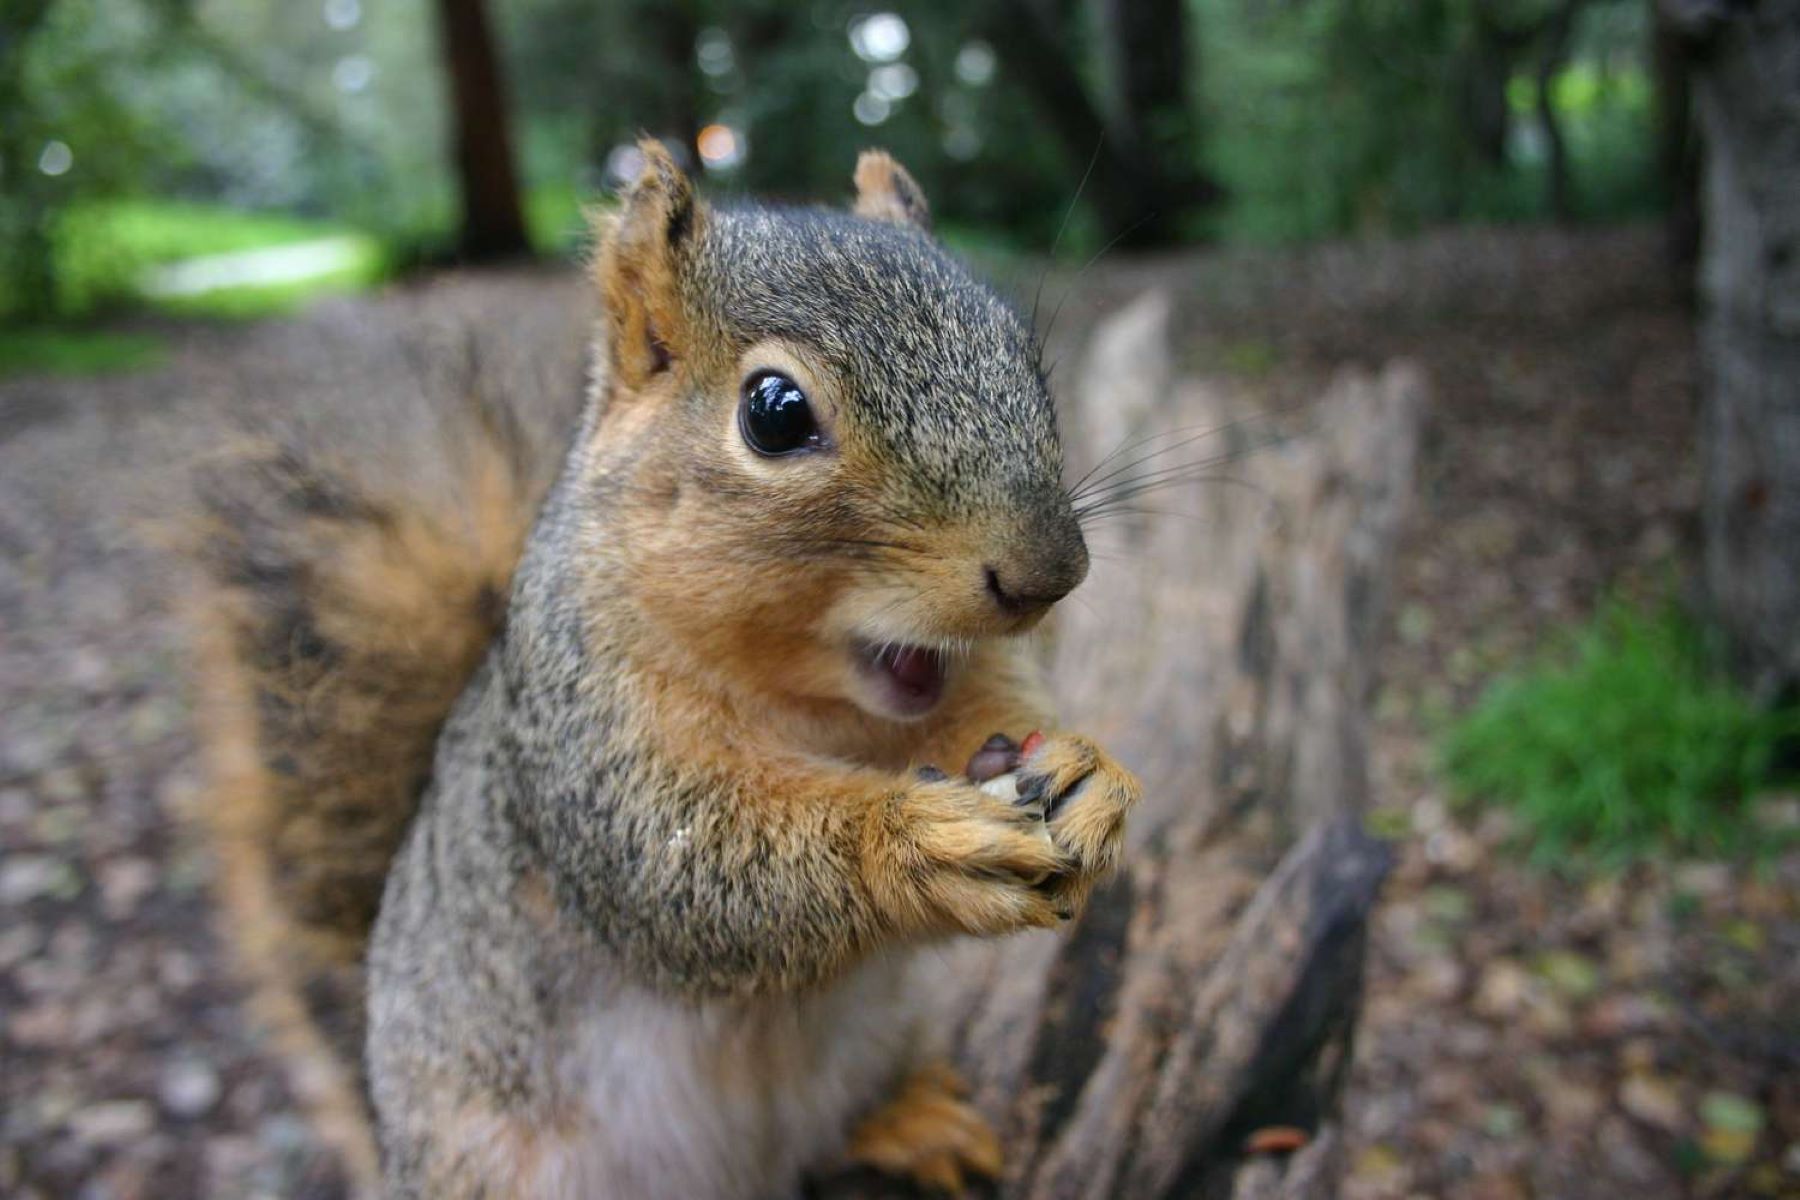 Discover The Enormous Squirrels In The World’s Most Surprising Locations!